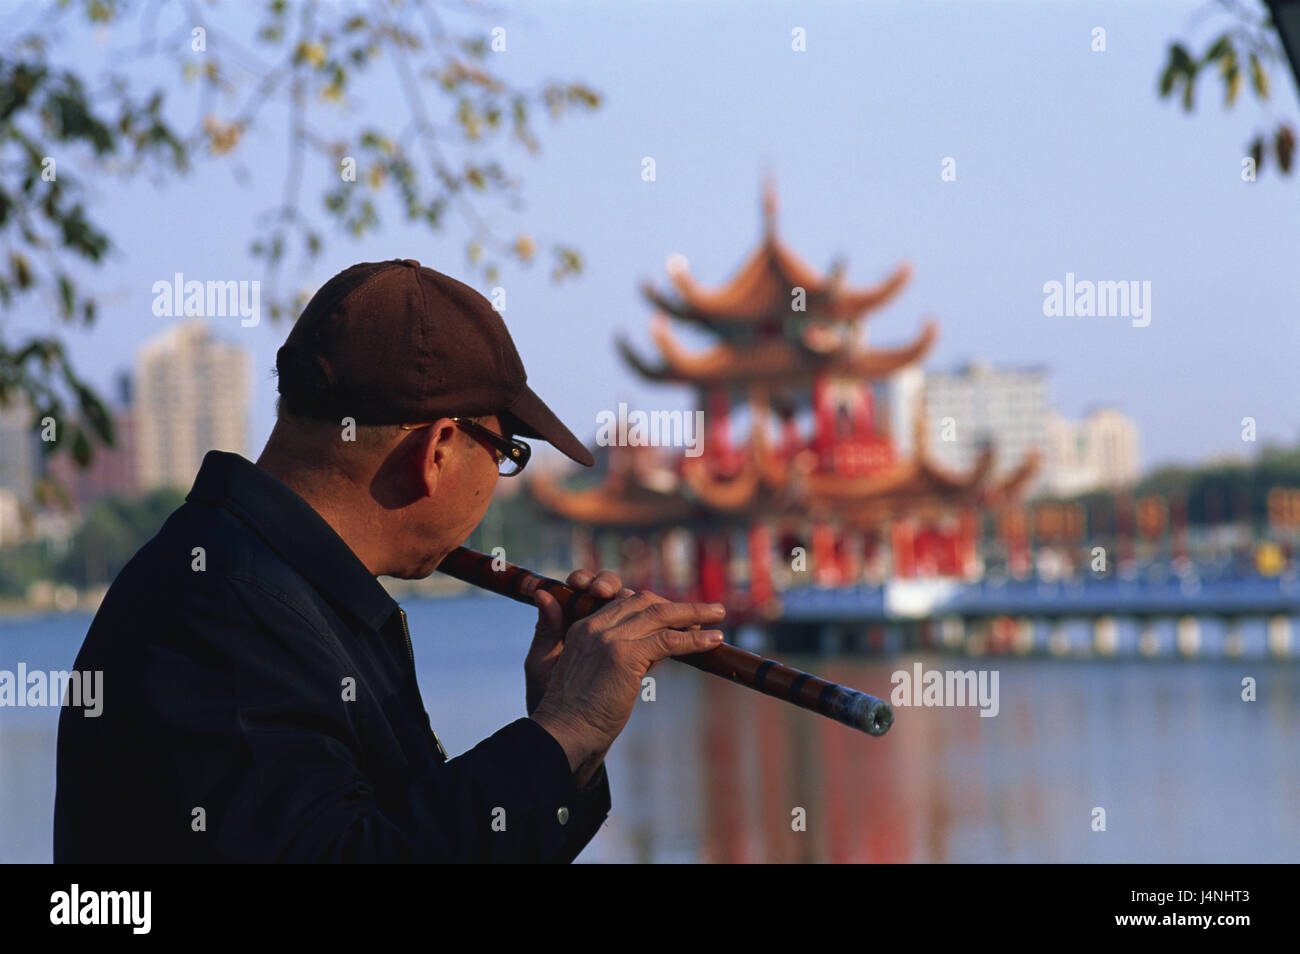 Taiwan, Kaohsiung, Lotos lake, man, flute, play, back view, blur, no model release, Asia, destination, place of interest, Taoism, temple, person, Asian, leisure time, headgear, glasses, music, musical instrument, play on the flute, transverse flute, melody, détente, Stock Photo